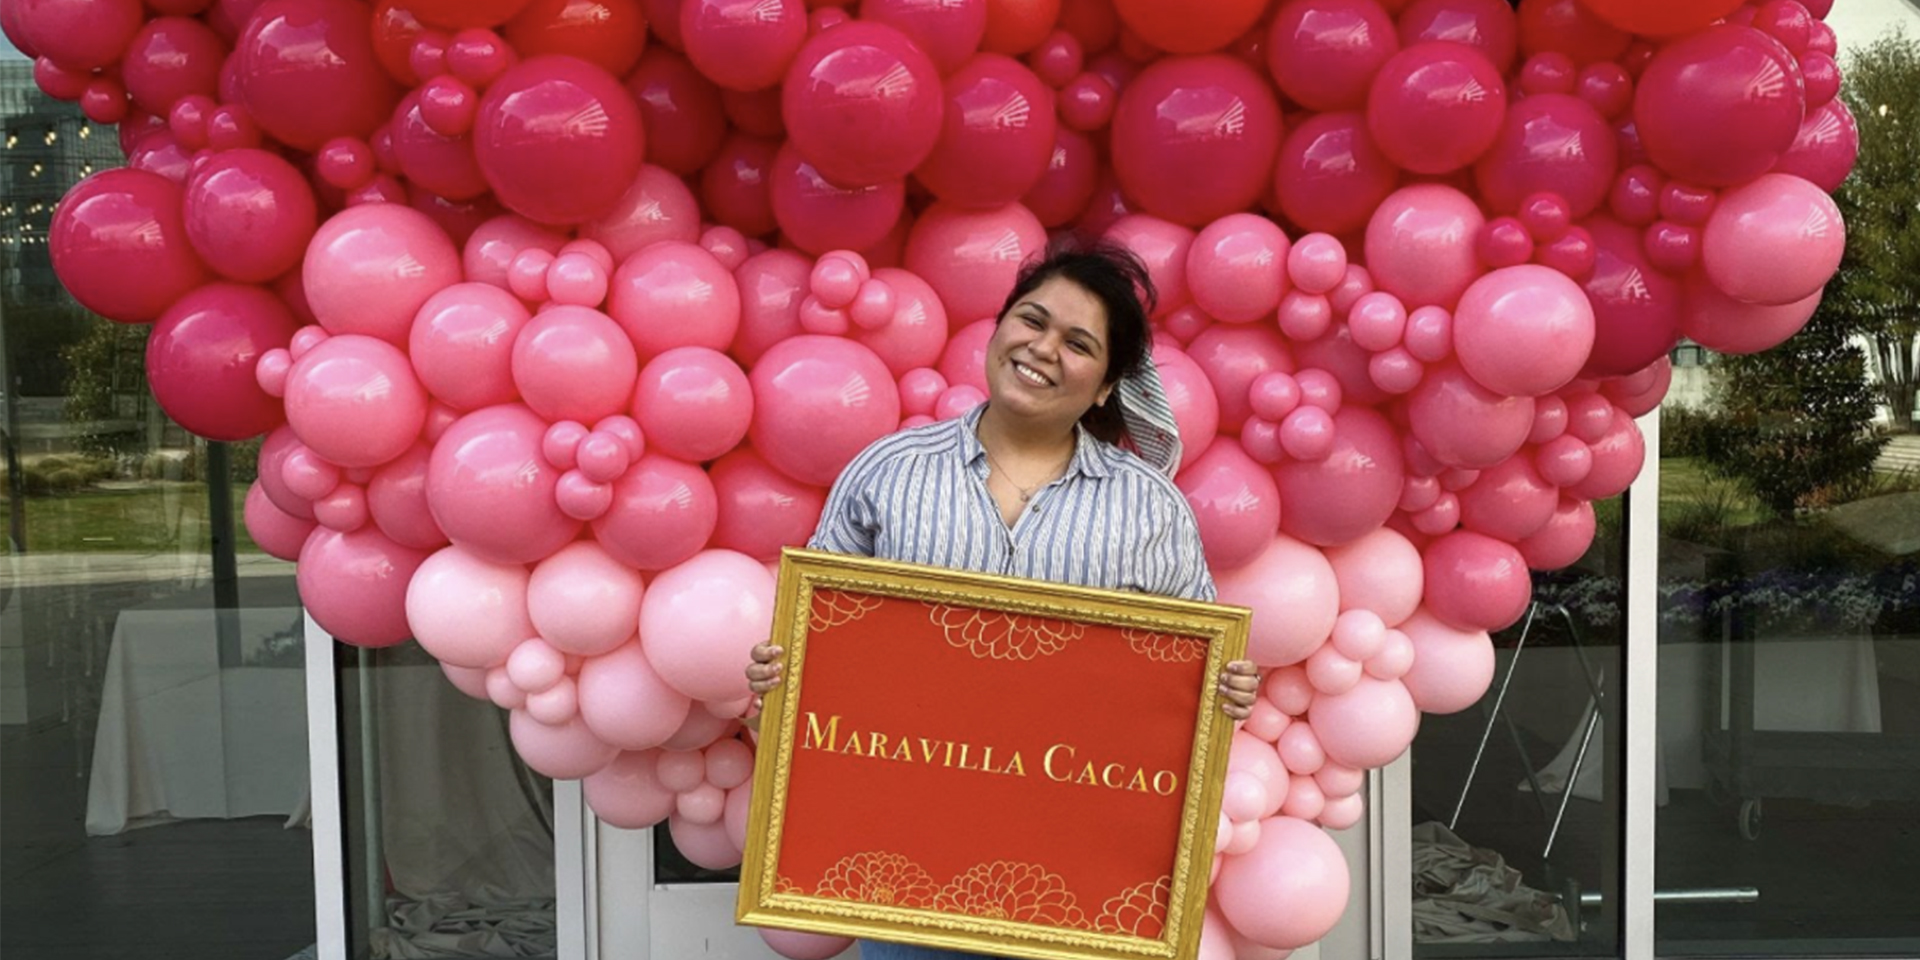 Smiling woman holding a sign with pink and red balloons in the background.